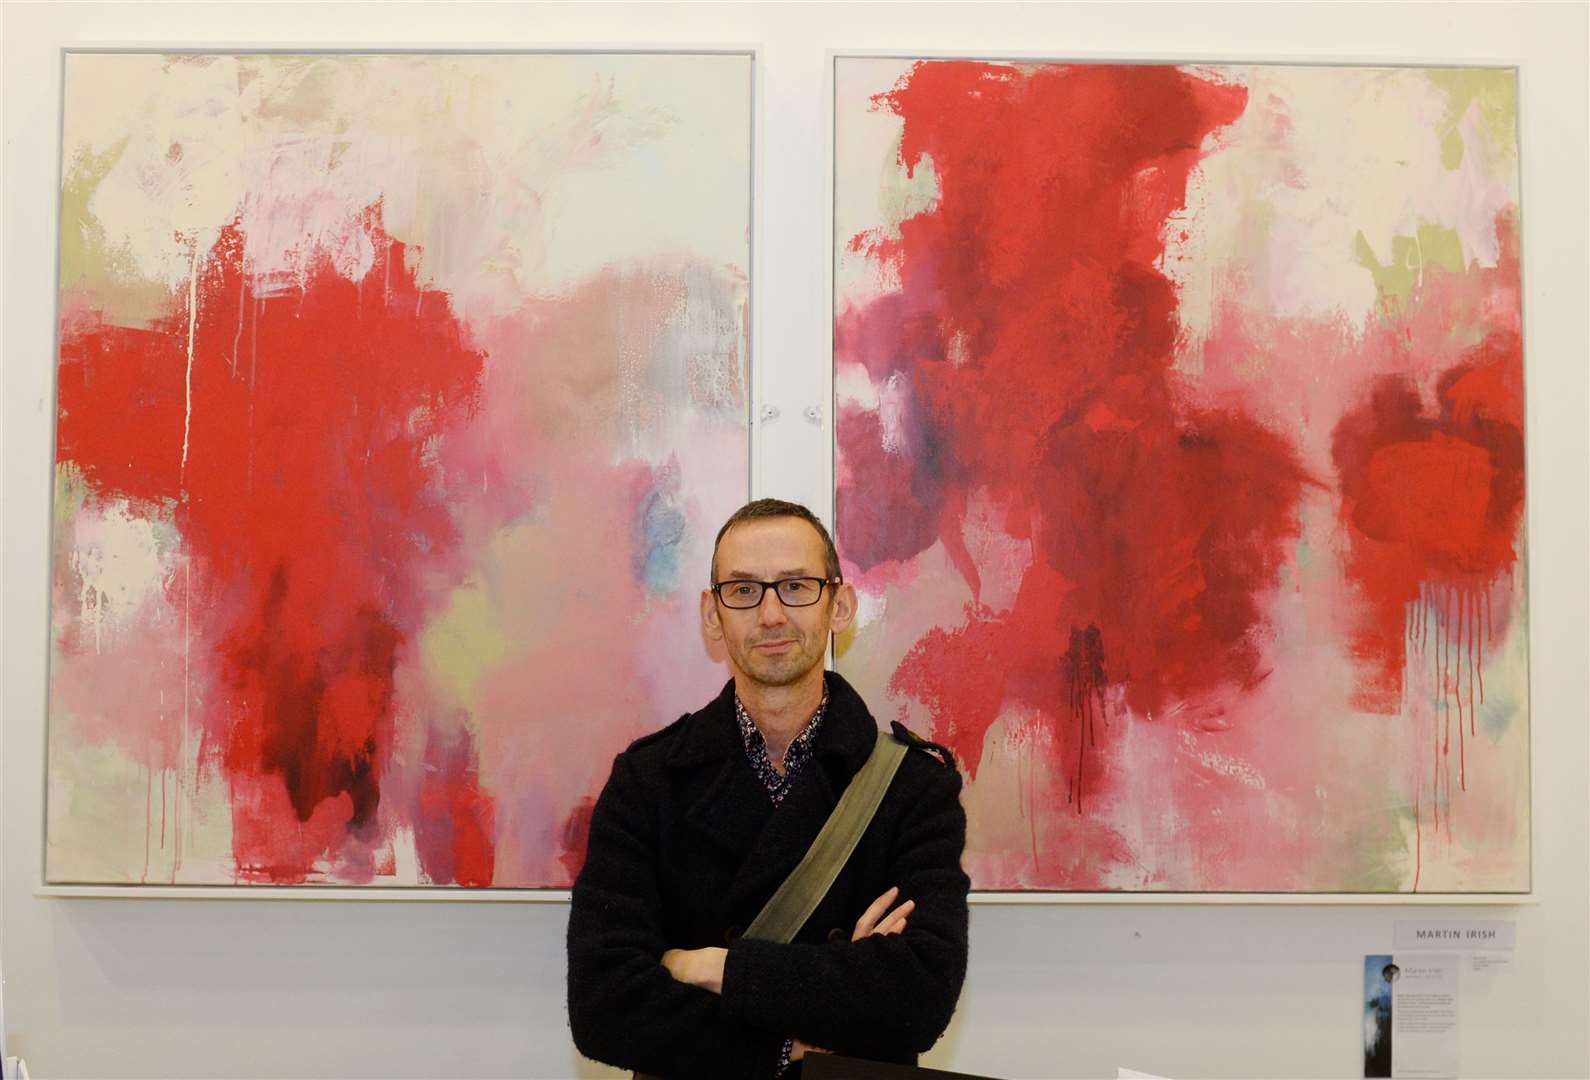 Martin Irish with his work, Waiting for Silence and I Can Almost See Your Thoughts.